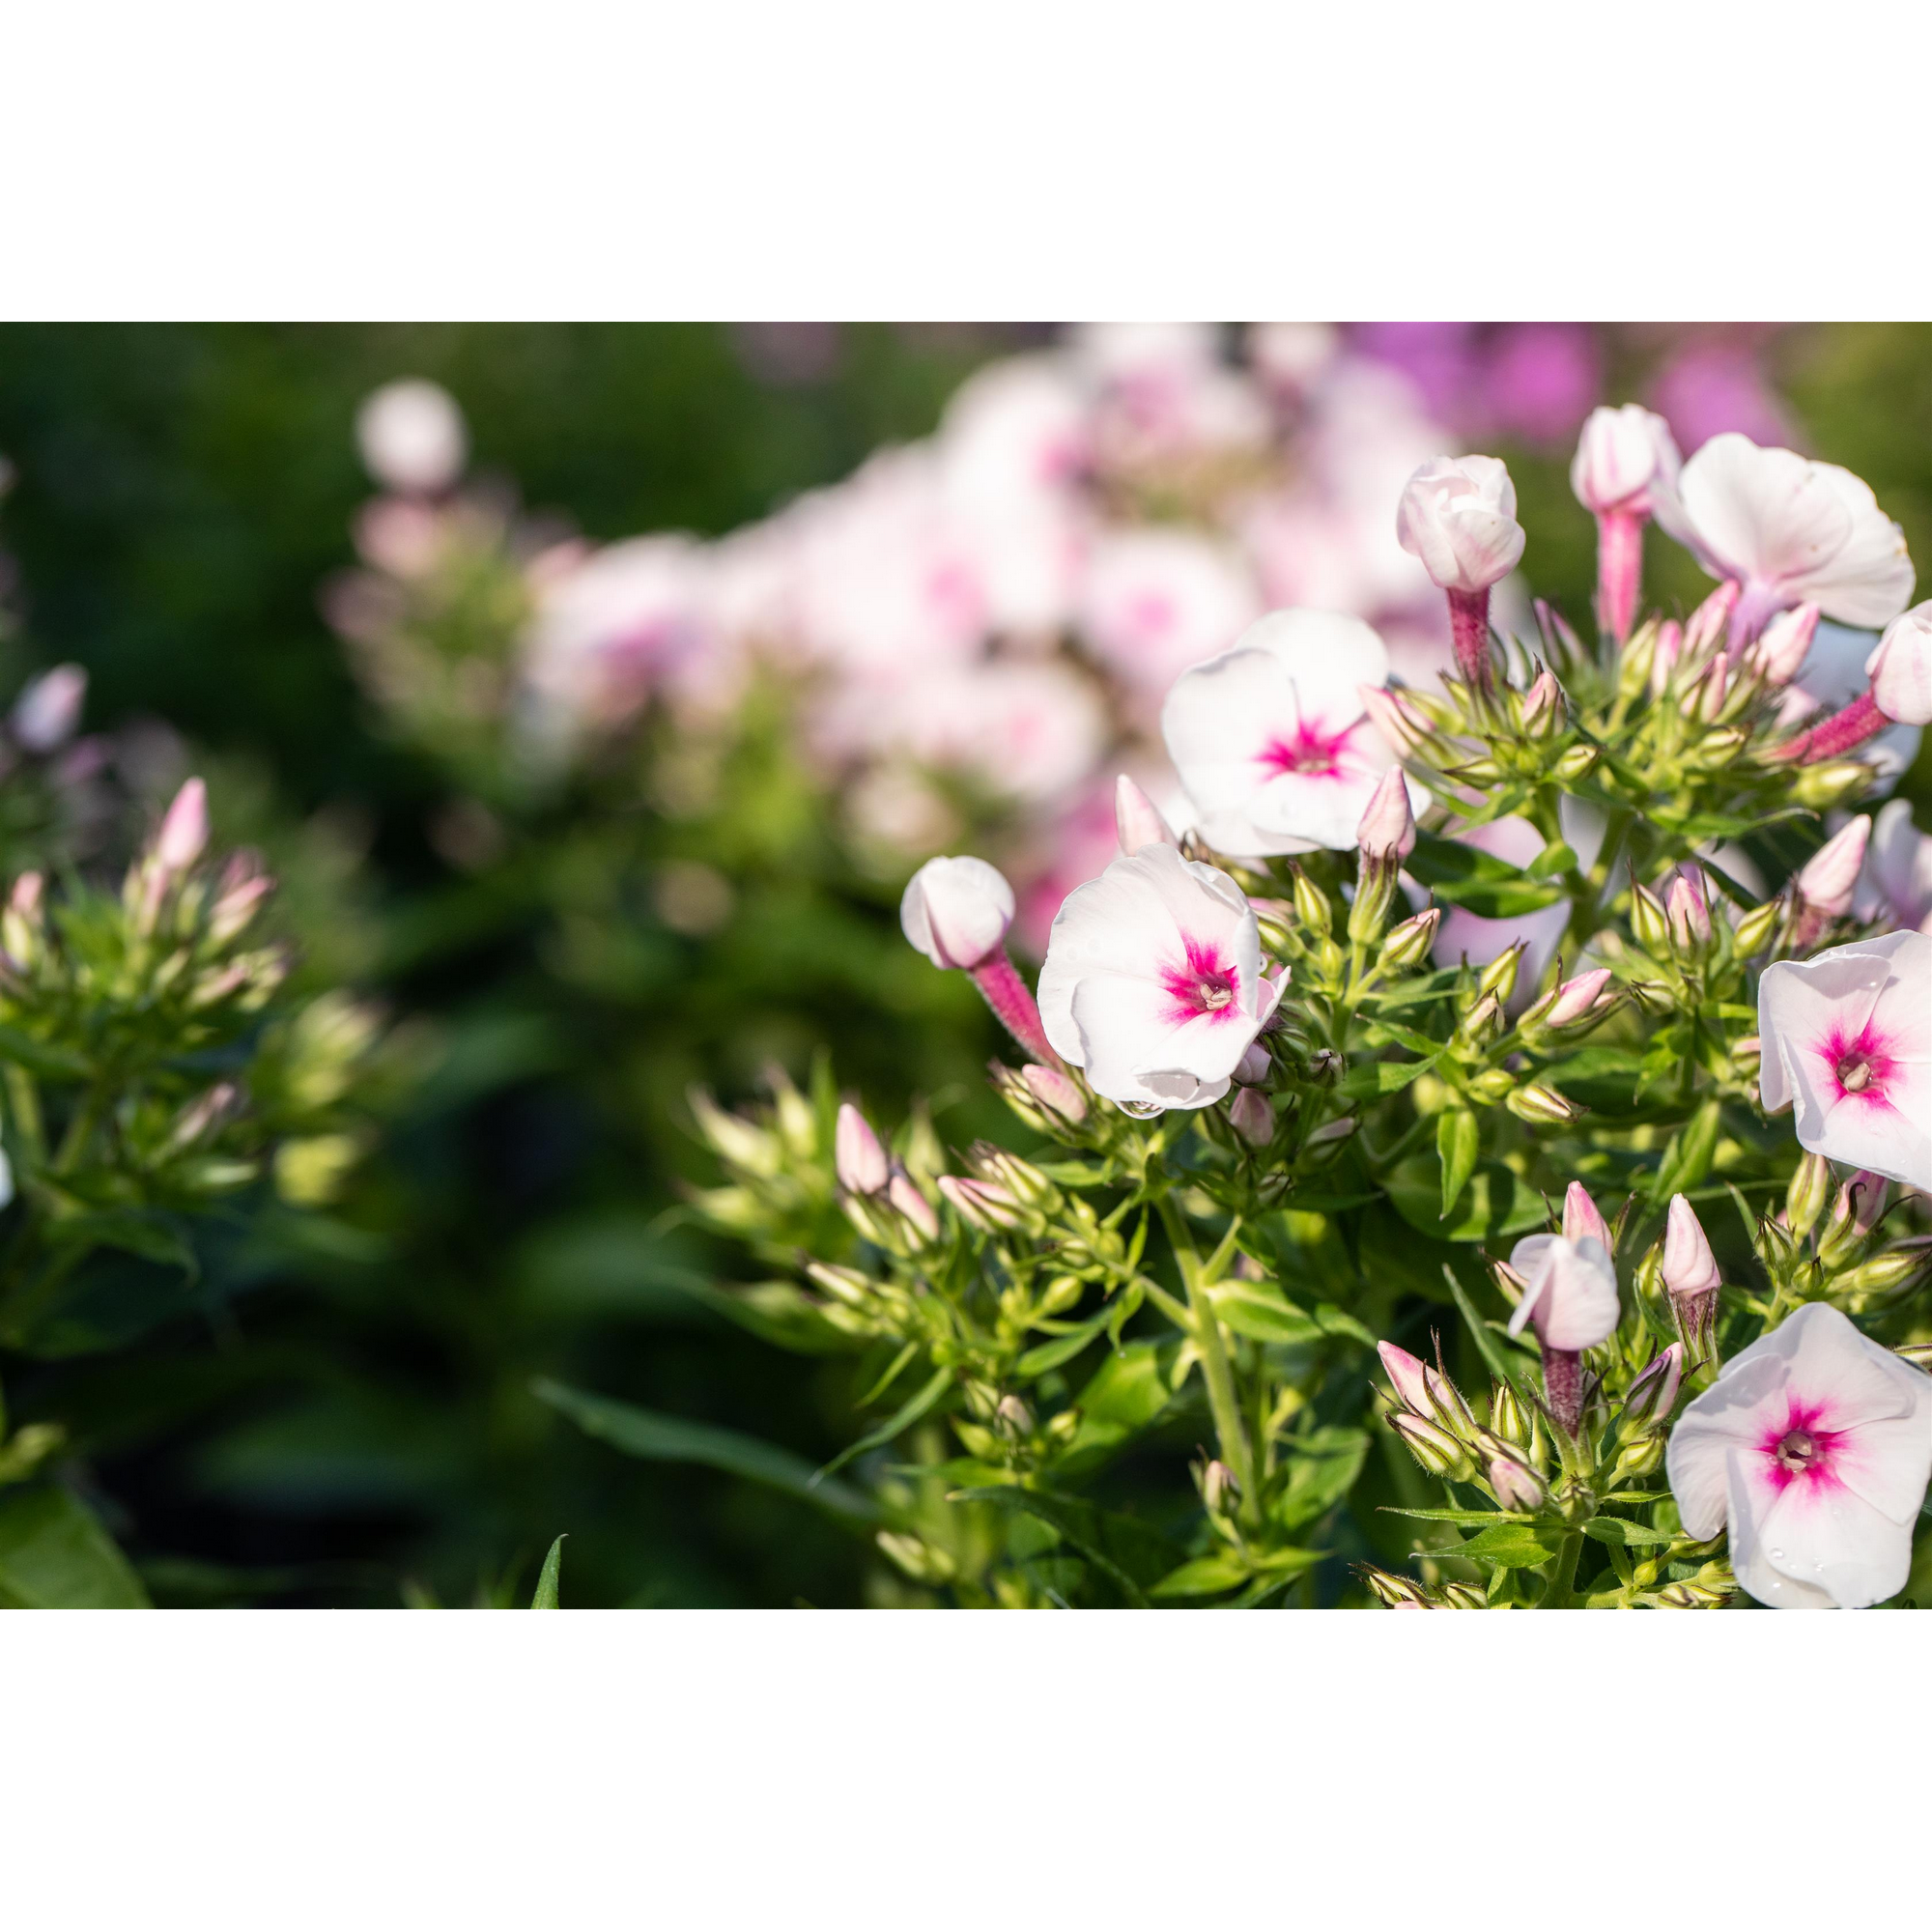 Hoher Staudenphlox 'Miss Holland' weiß/rosa 15 cm Topf + product picture